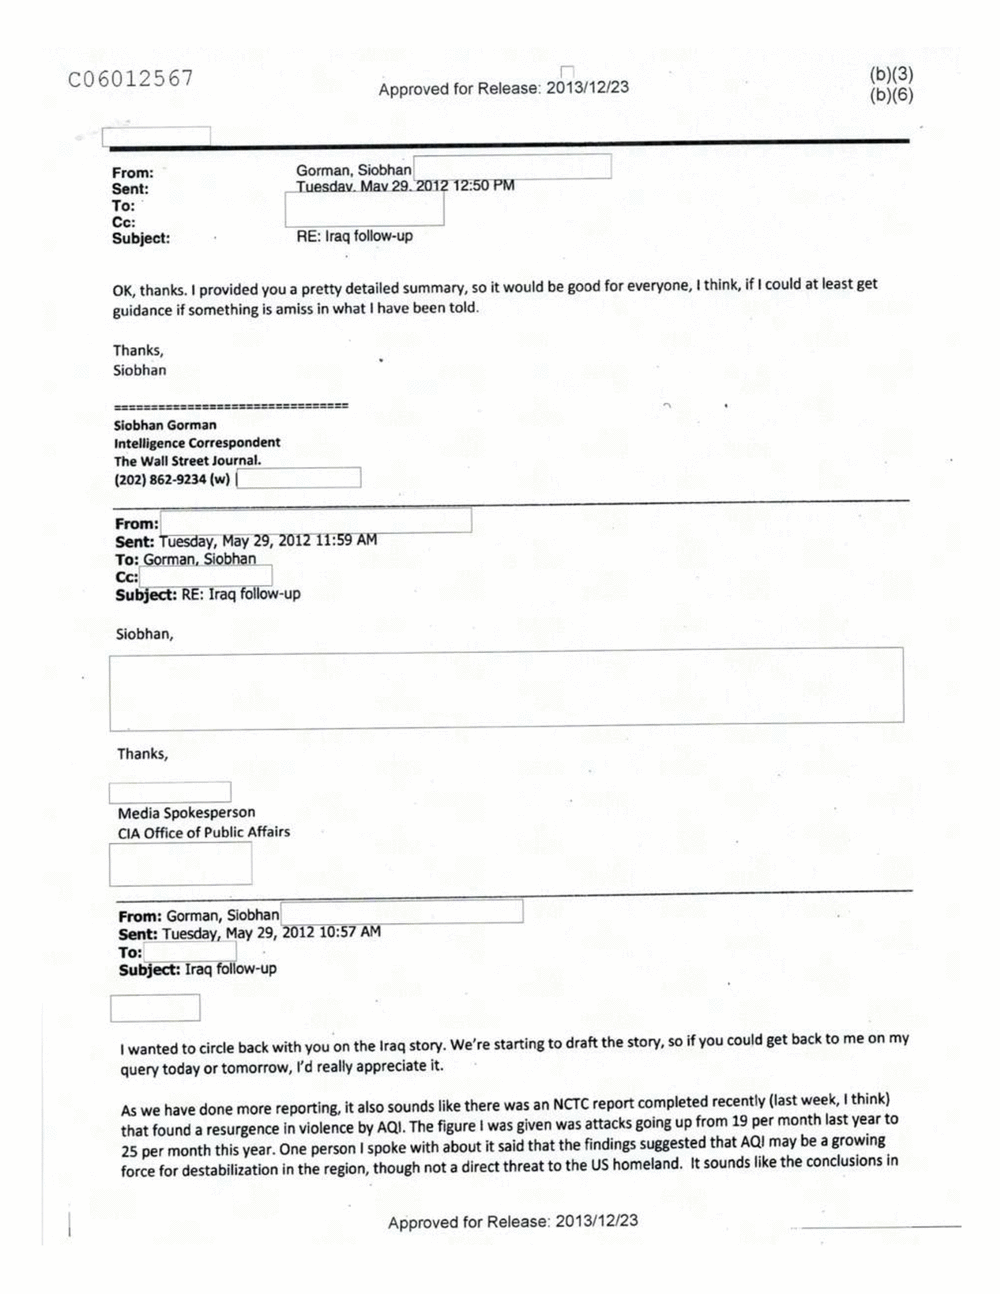 Page 98 from Email Correspondence Between Reporters and CIA Flacks